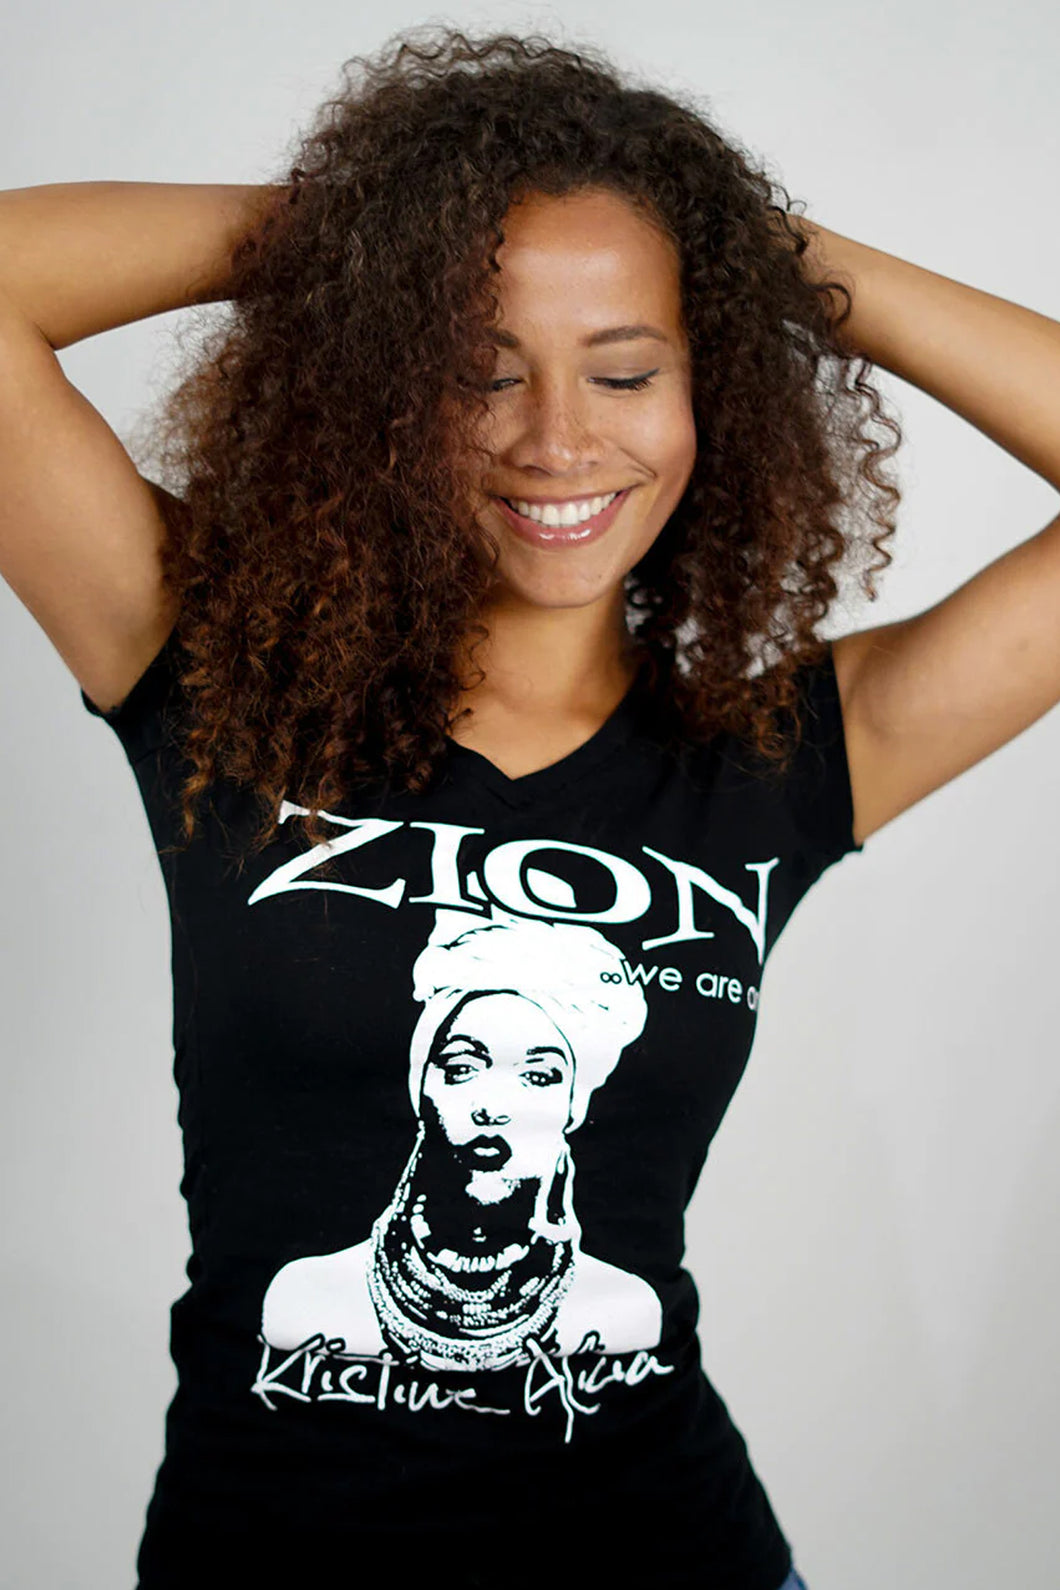 Cooyah x reggae artist, Kristine Alicia collaboration.  Women's v-neck, empress tee with Zion print.  Short sleeve graphic tee.  Jamaican clothing brand since 1987.